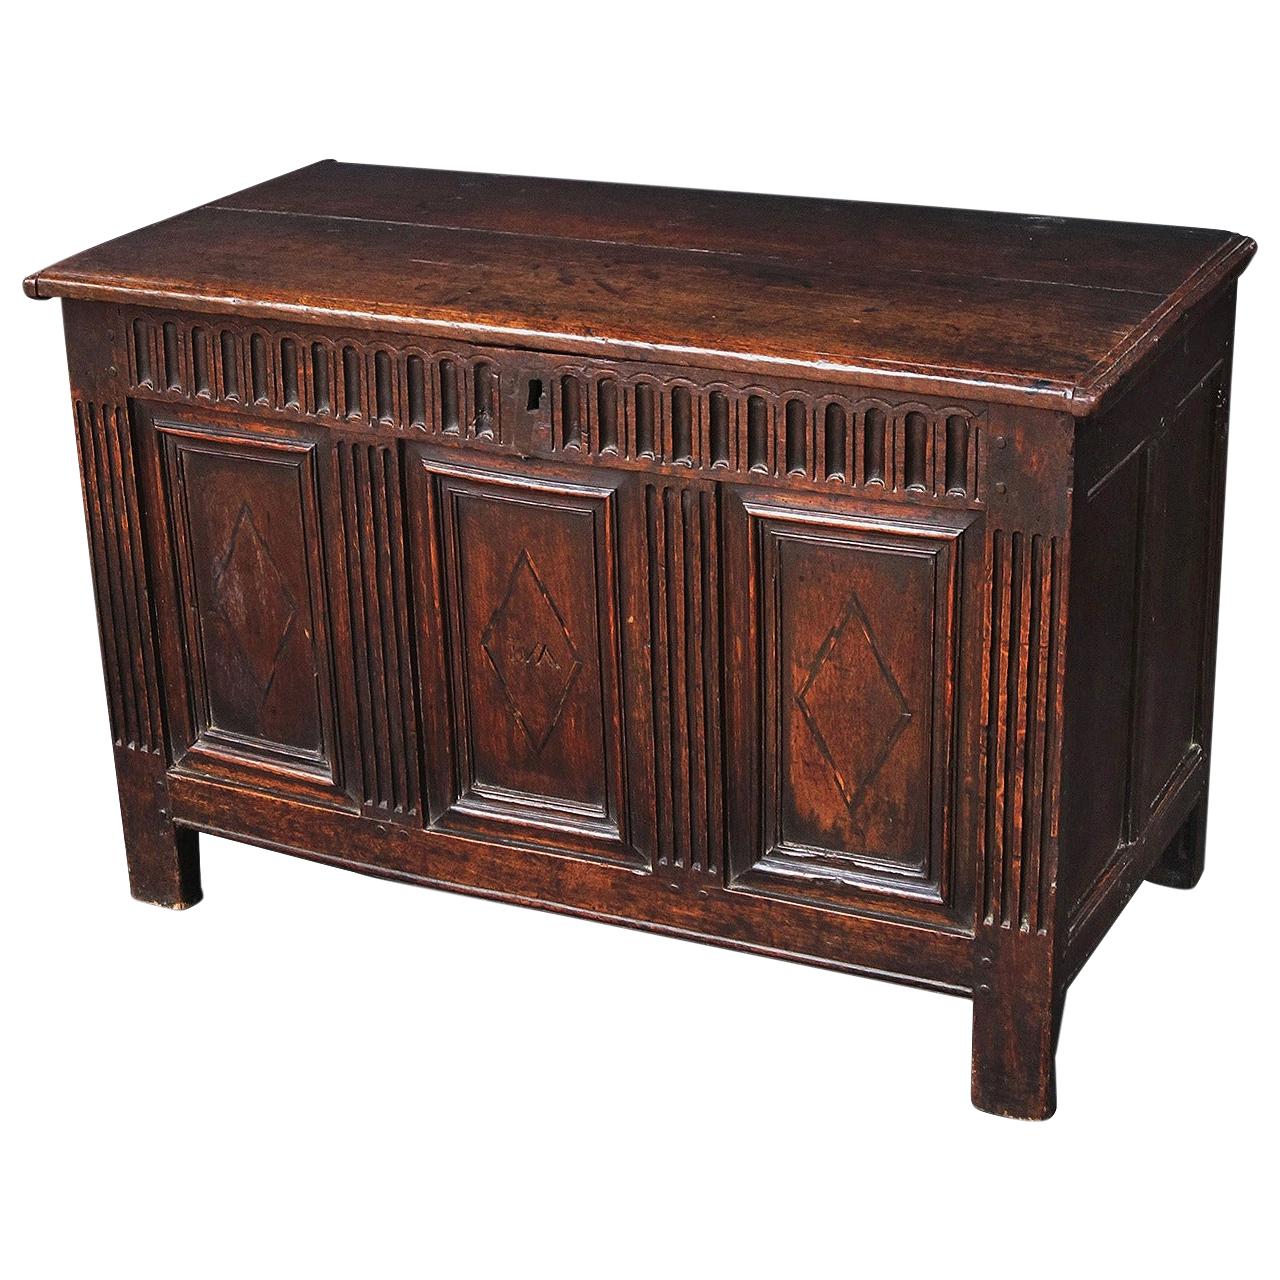 17th Century English Oak Joined Chest or Trunk